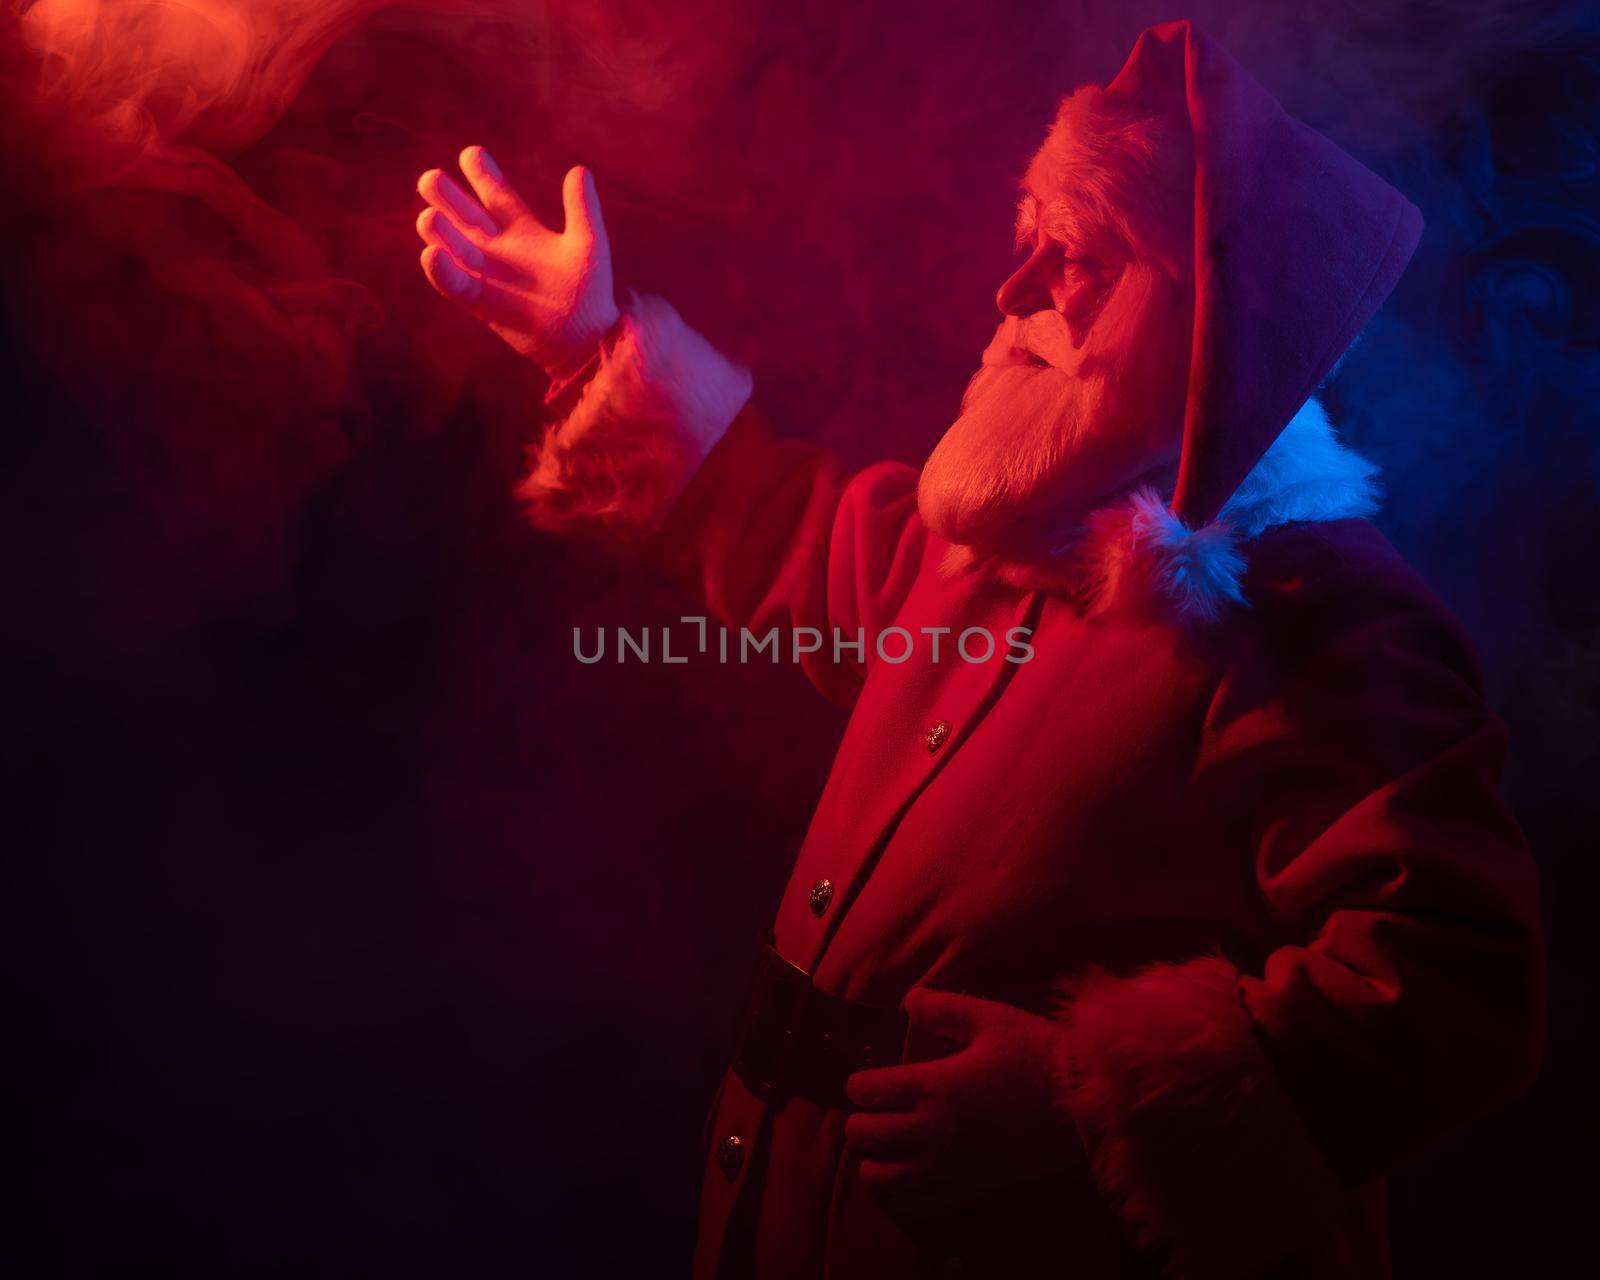 Santa Claus portrait in blue red neon light and smoke